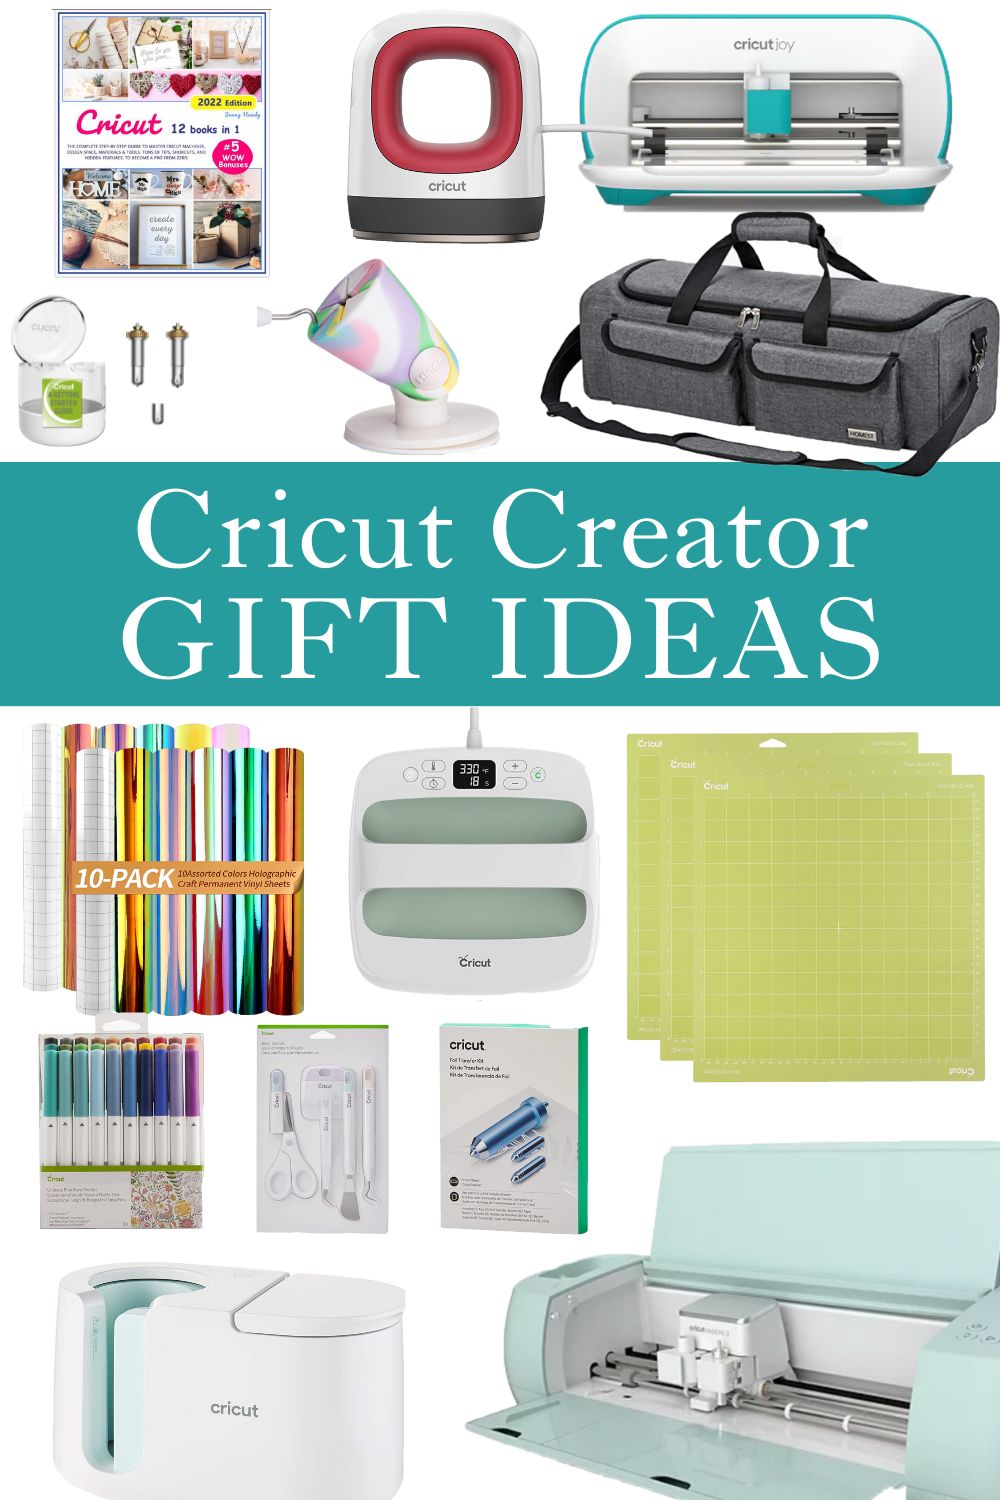 Gifts for Cricut users